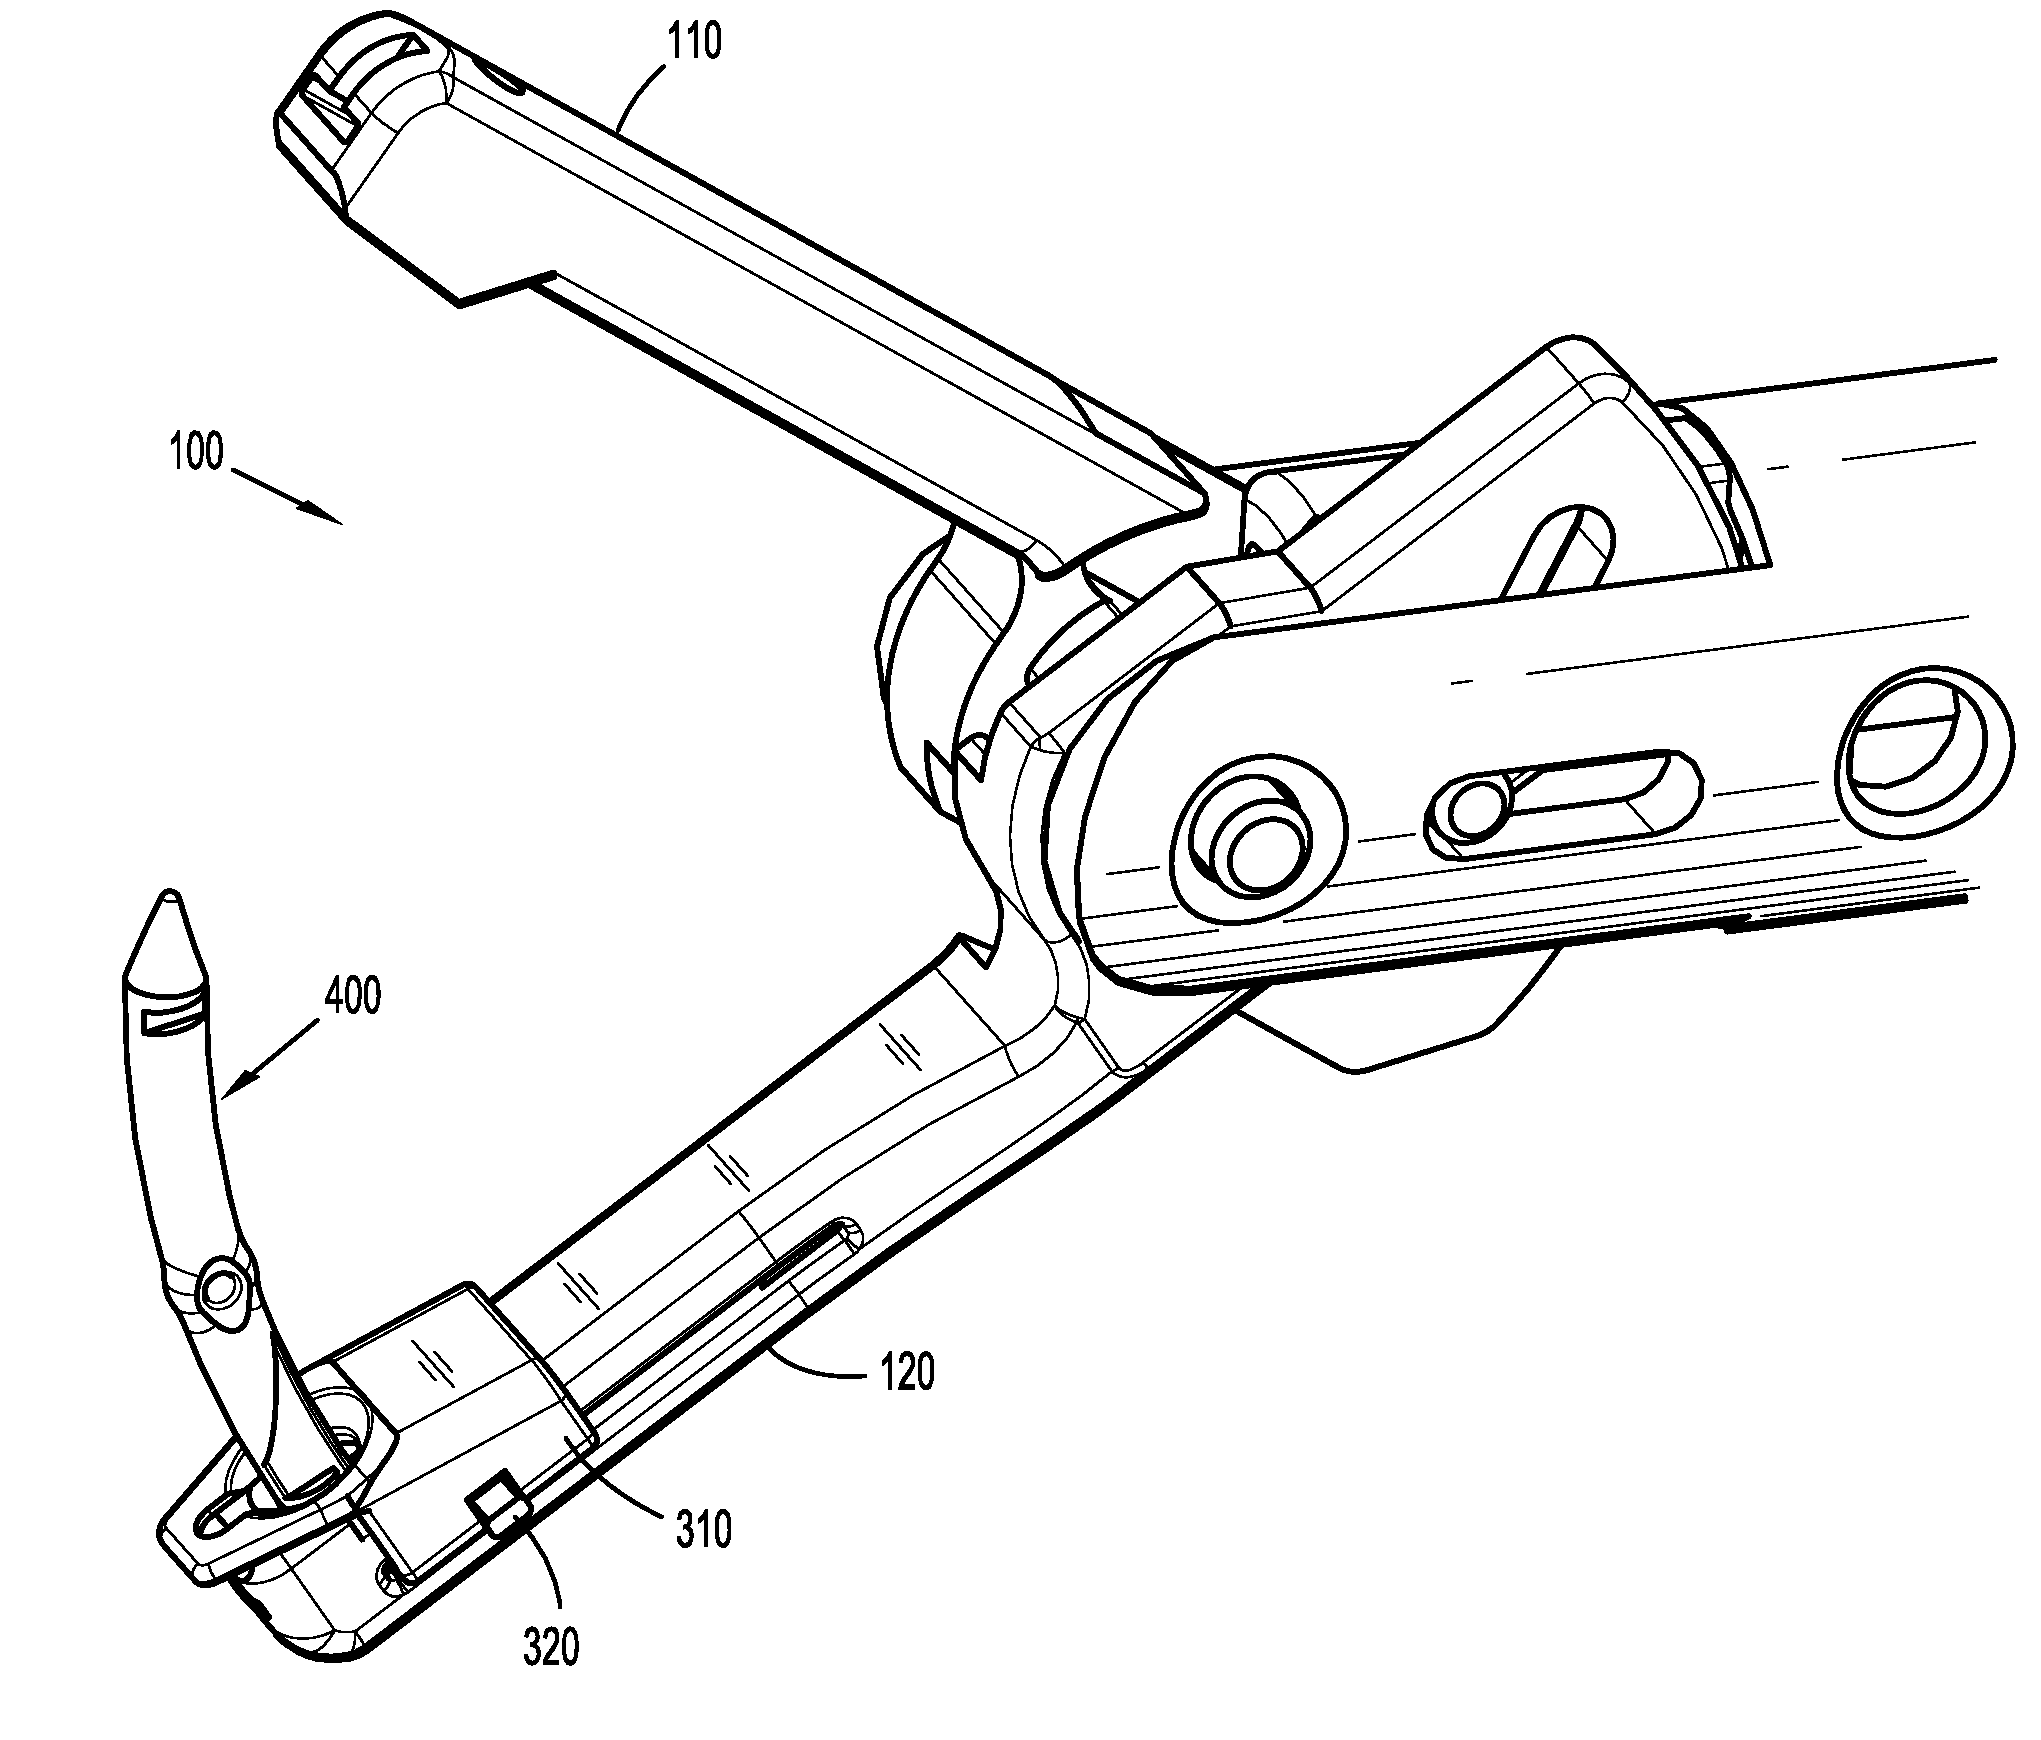 Suturing Device with Deployable Needle